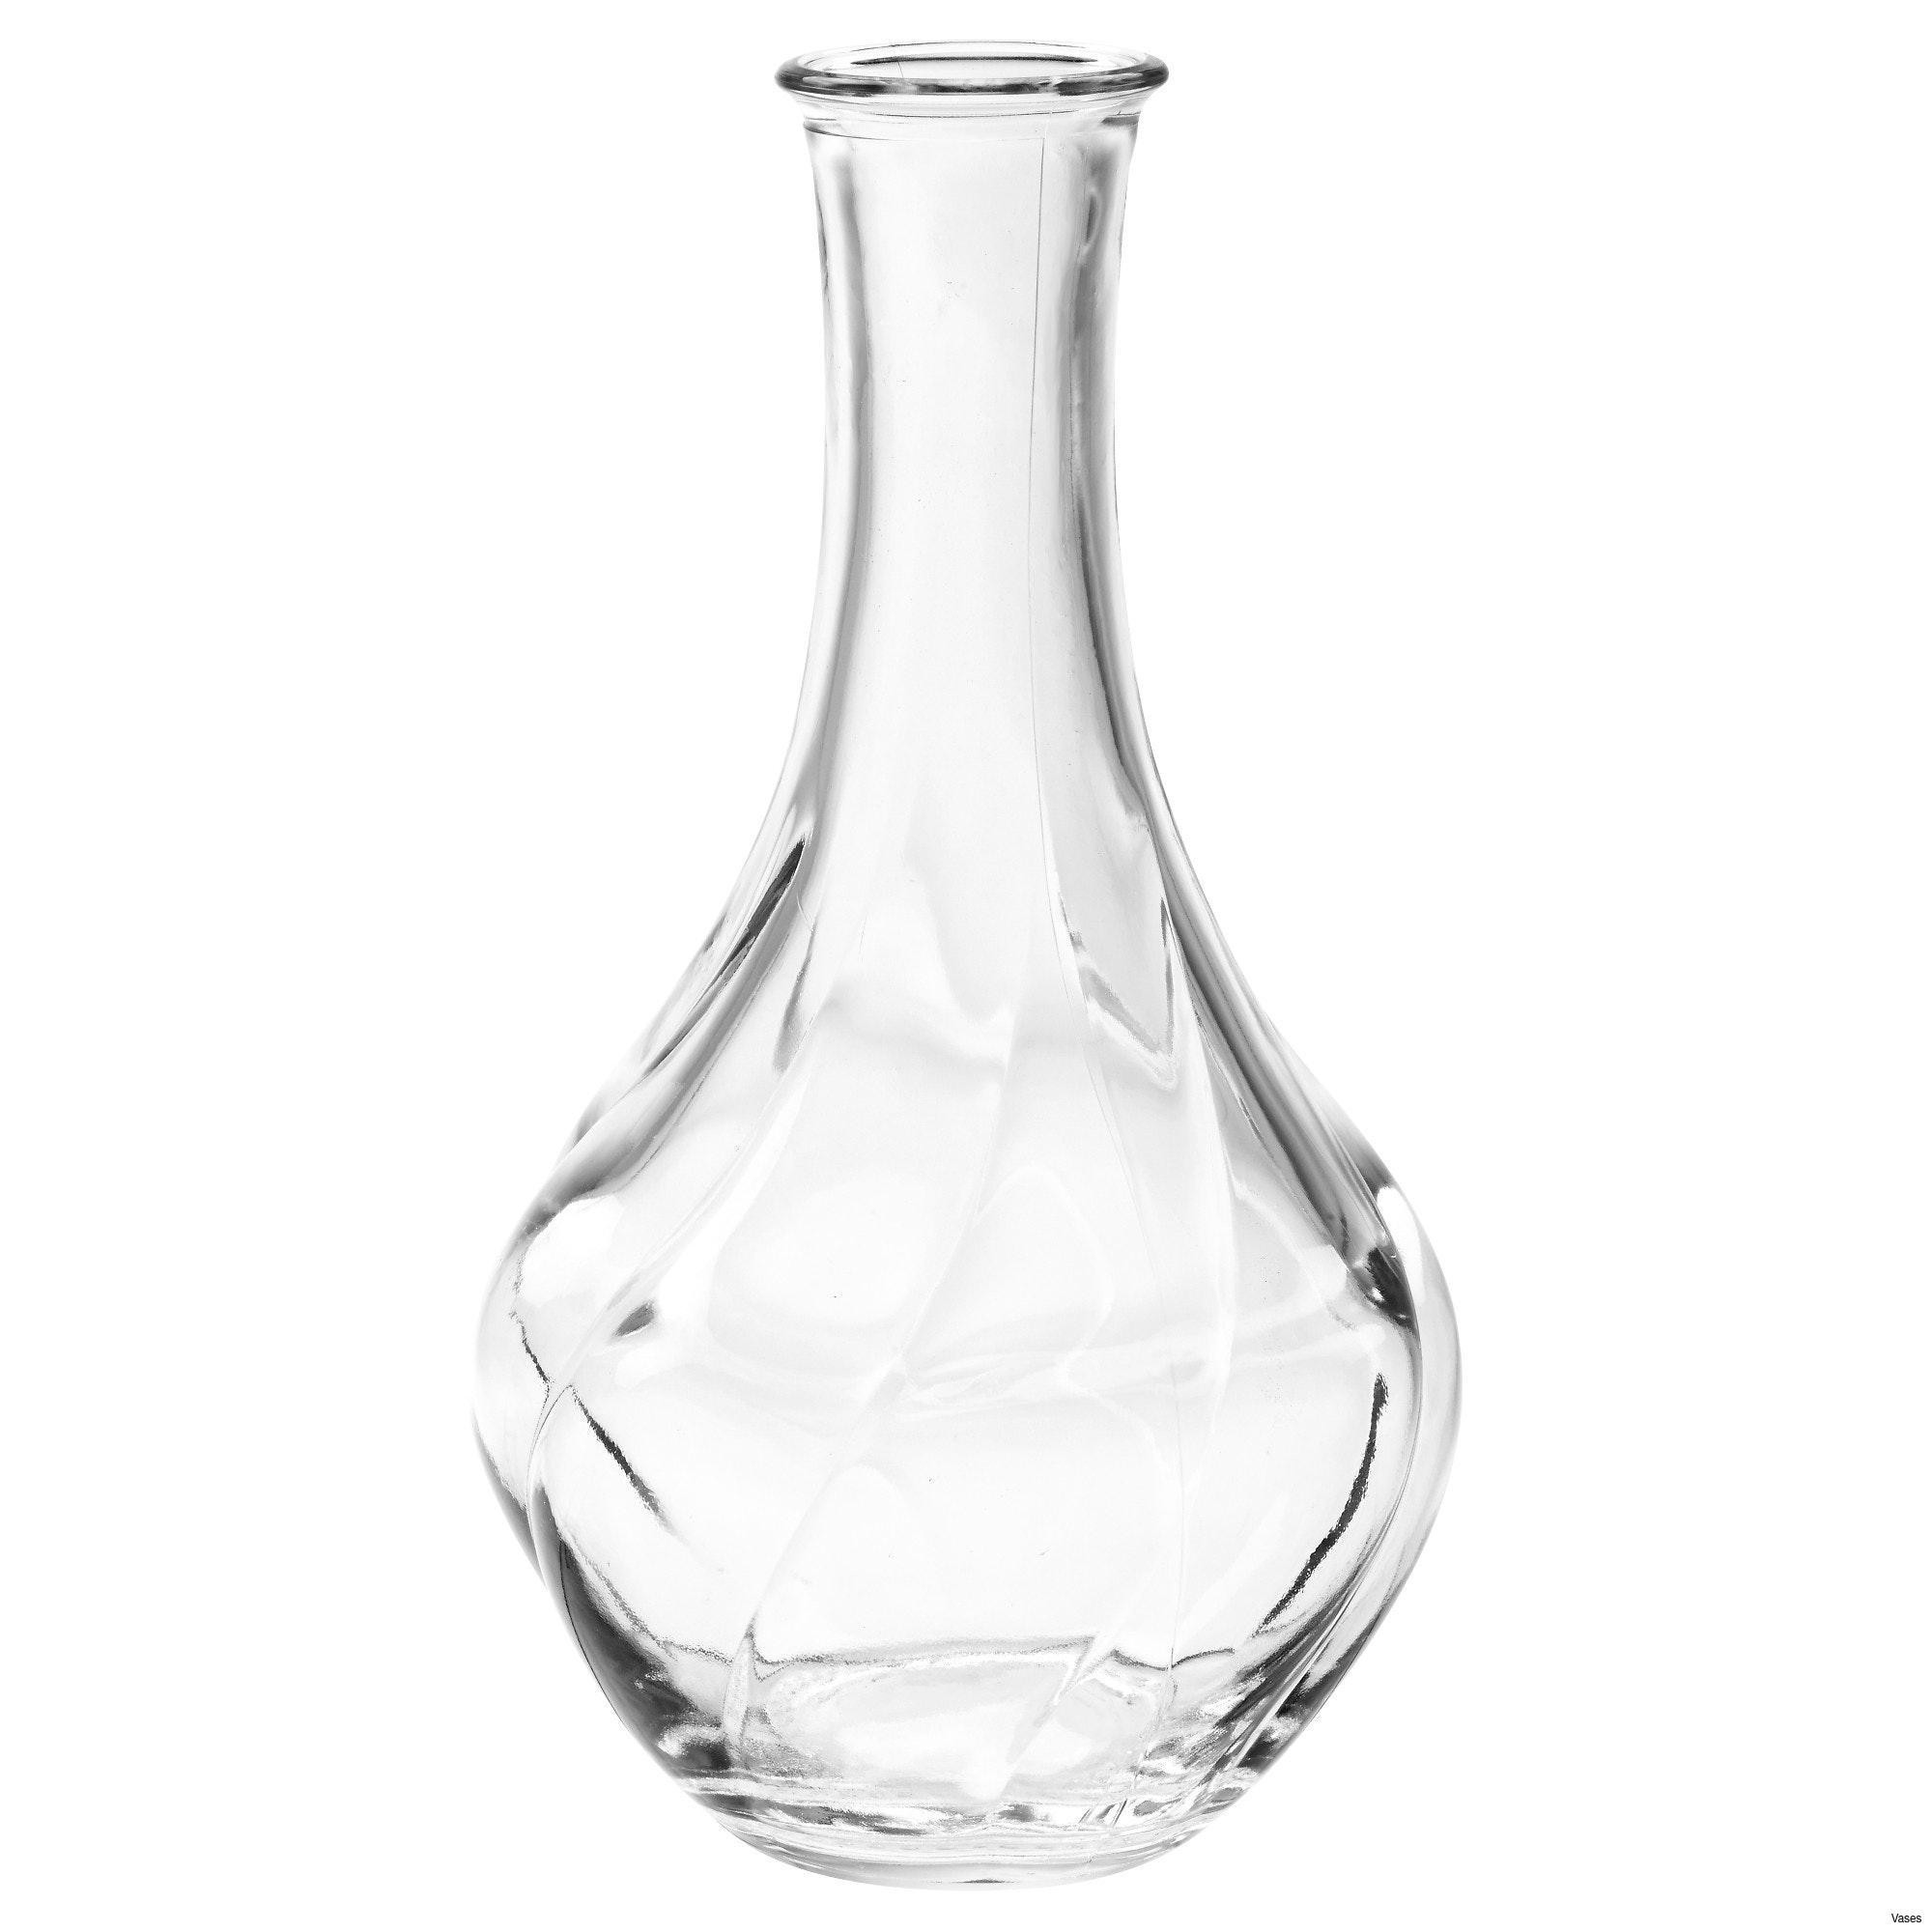 29 Lovely Tall Flower Vases wholesale 2024 free download tall flower vases wholesale of 11 beautiful clear tall glass vases bogekompresorturkiye com with regard to living room glass vases fresh clear vase 0d tags amazing and also white interior pa